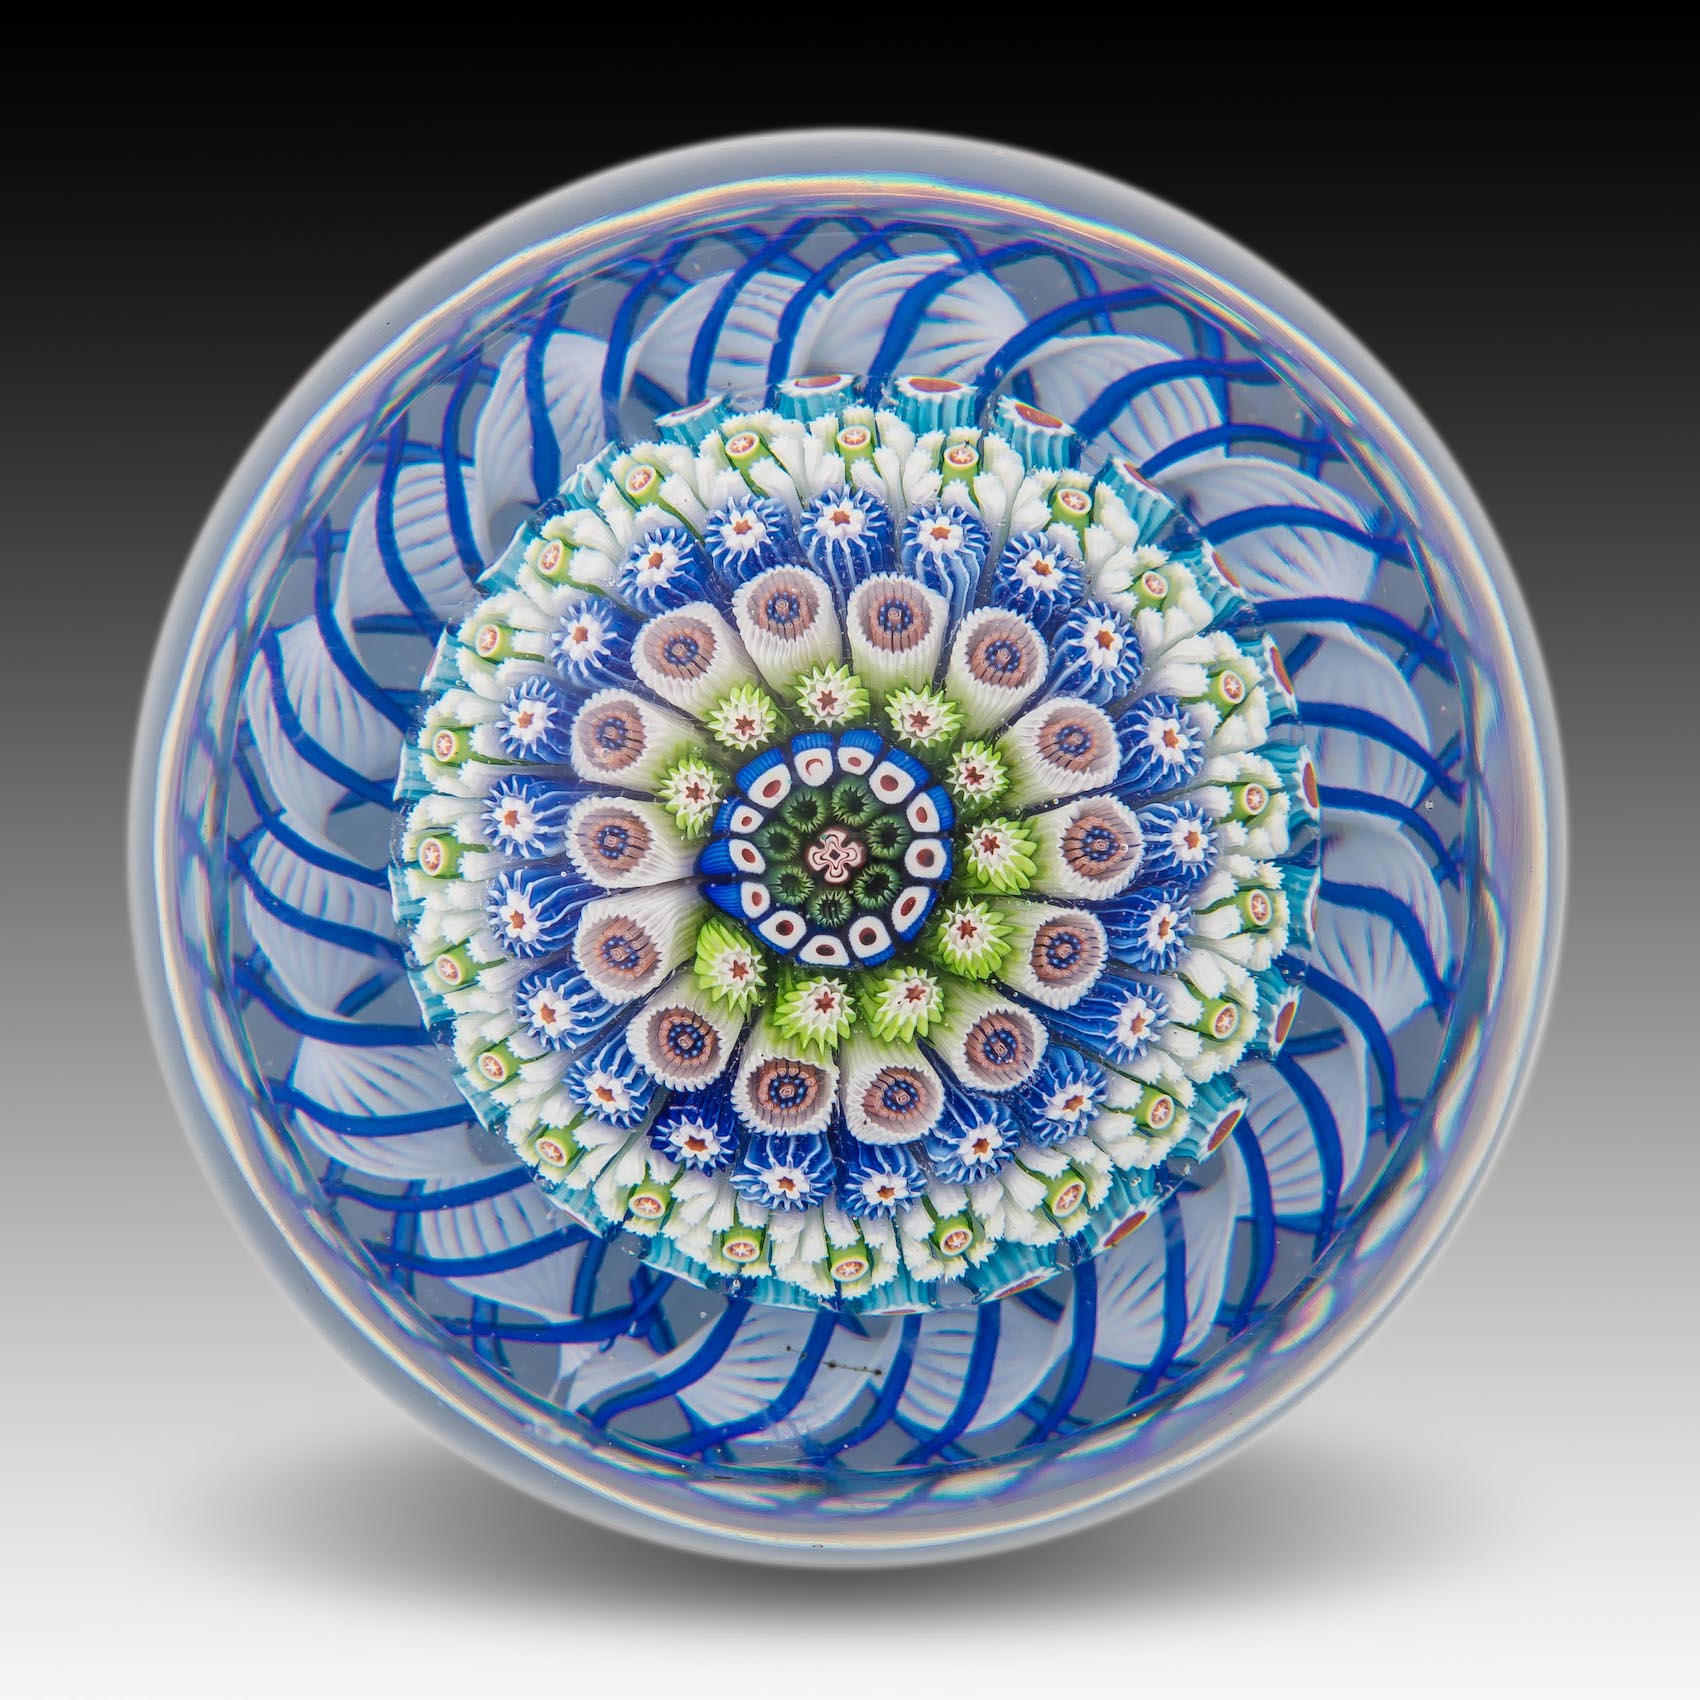 19th century Baccarat paperweight – one of many glass treasures discovered by Fileman Antiques - Effect Magazine